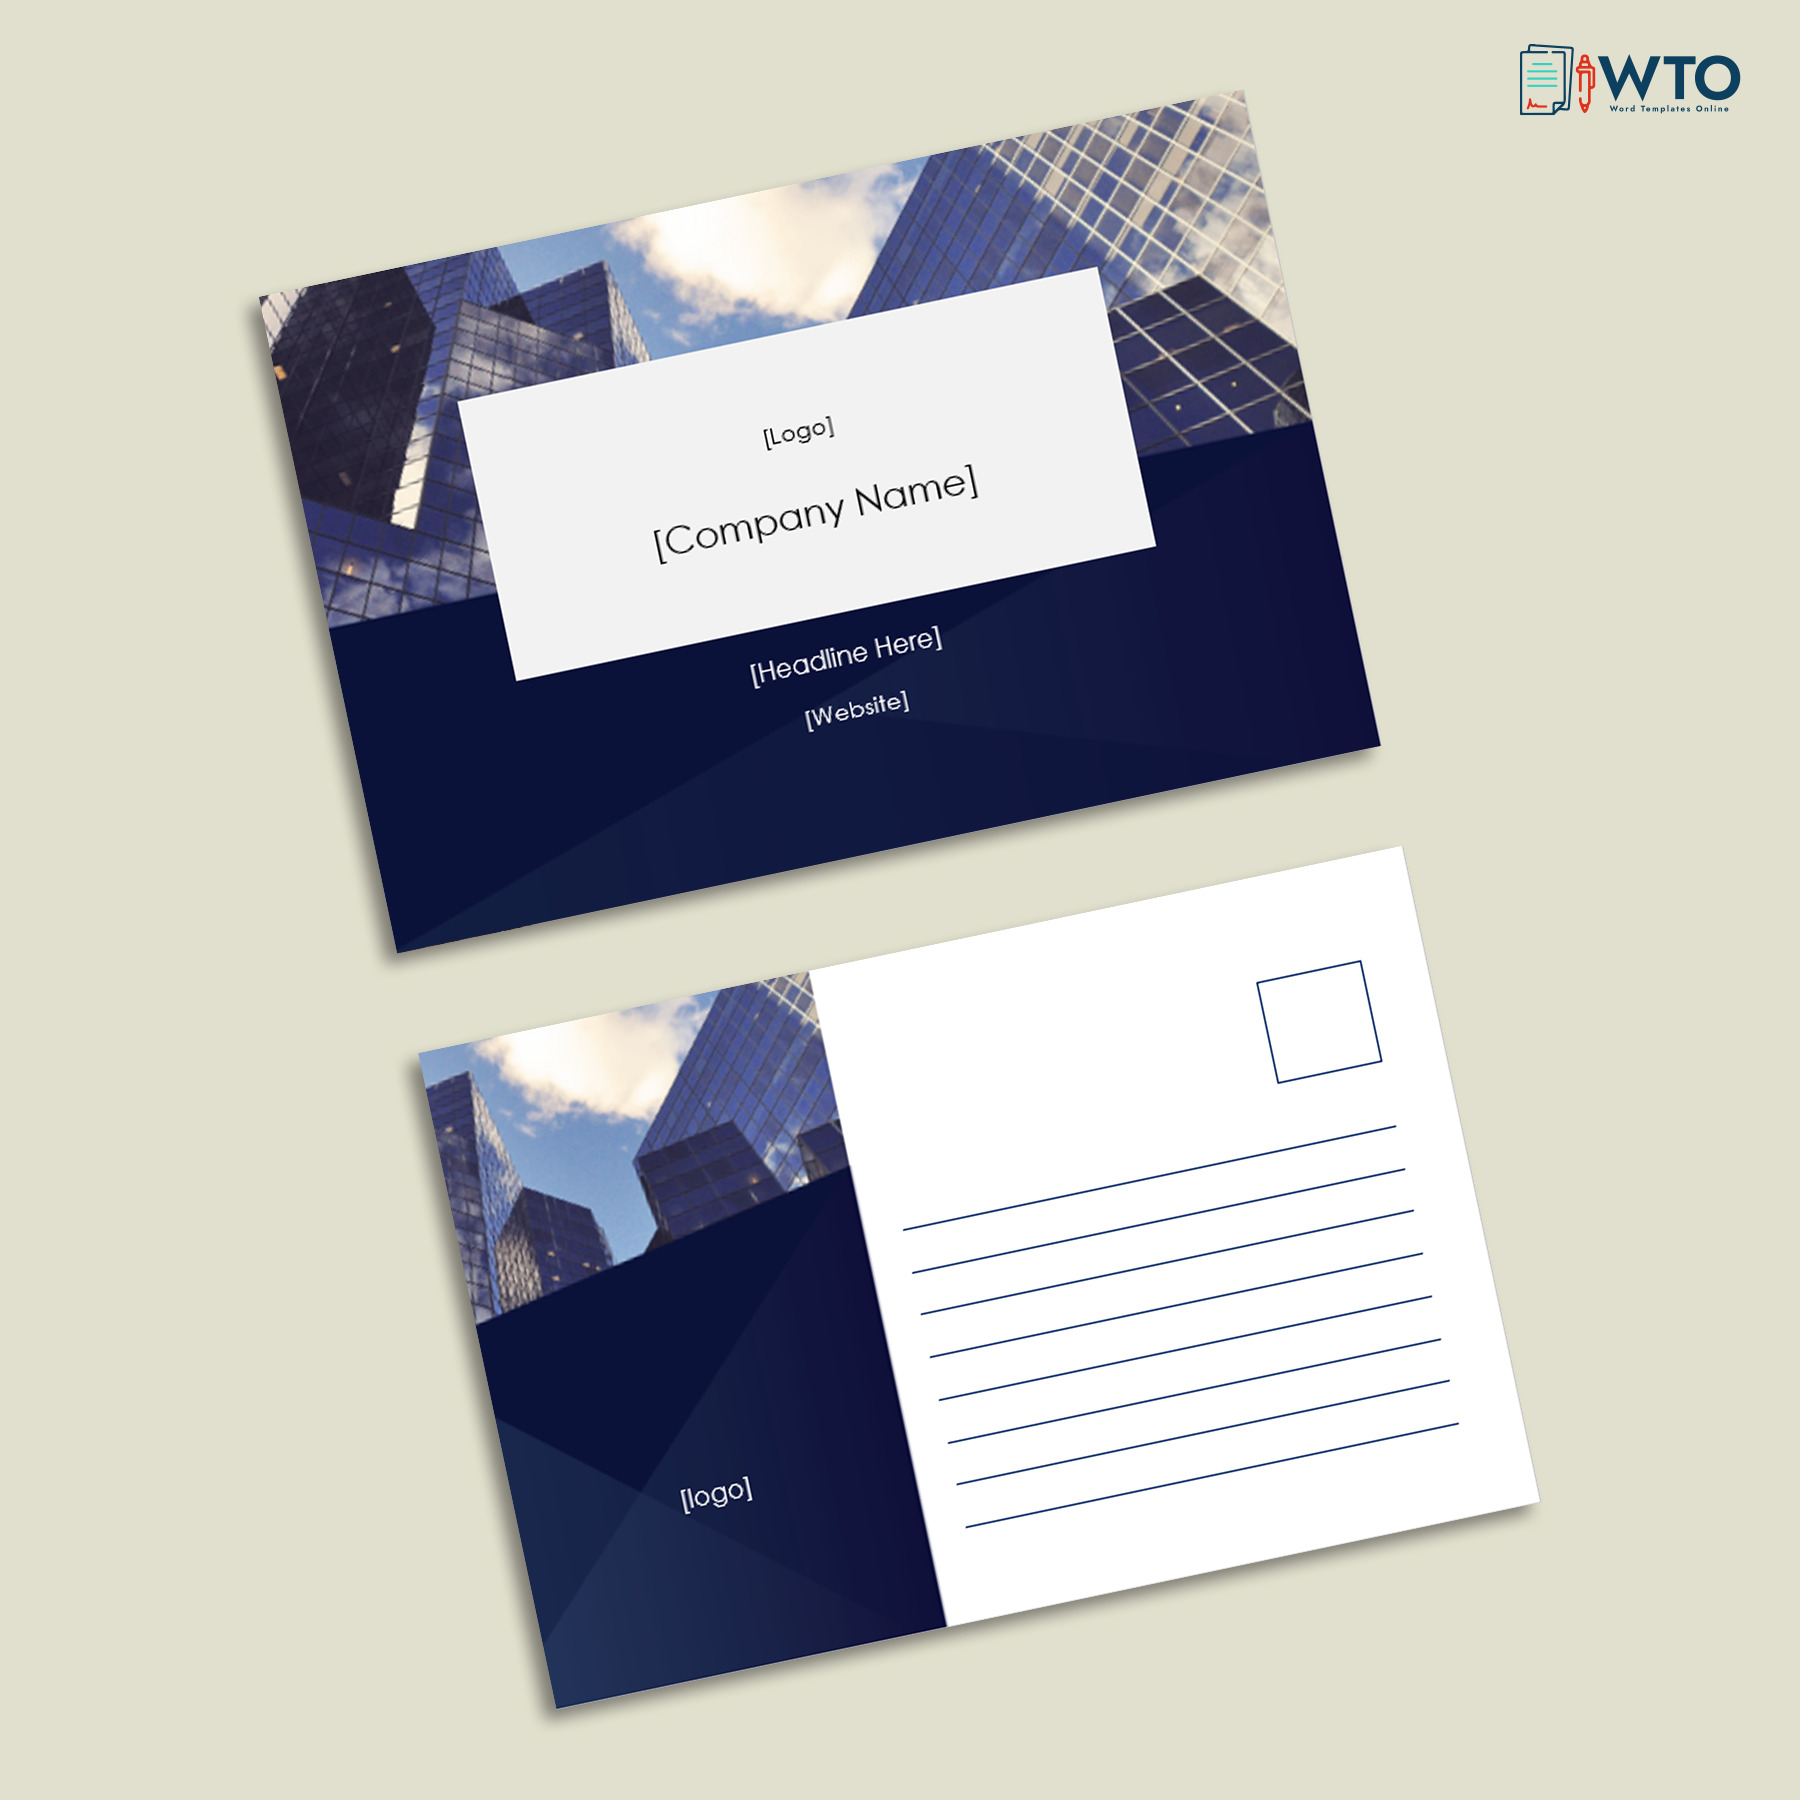 Editable Business Postcard in Word Format